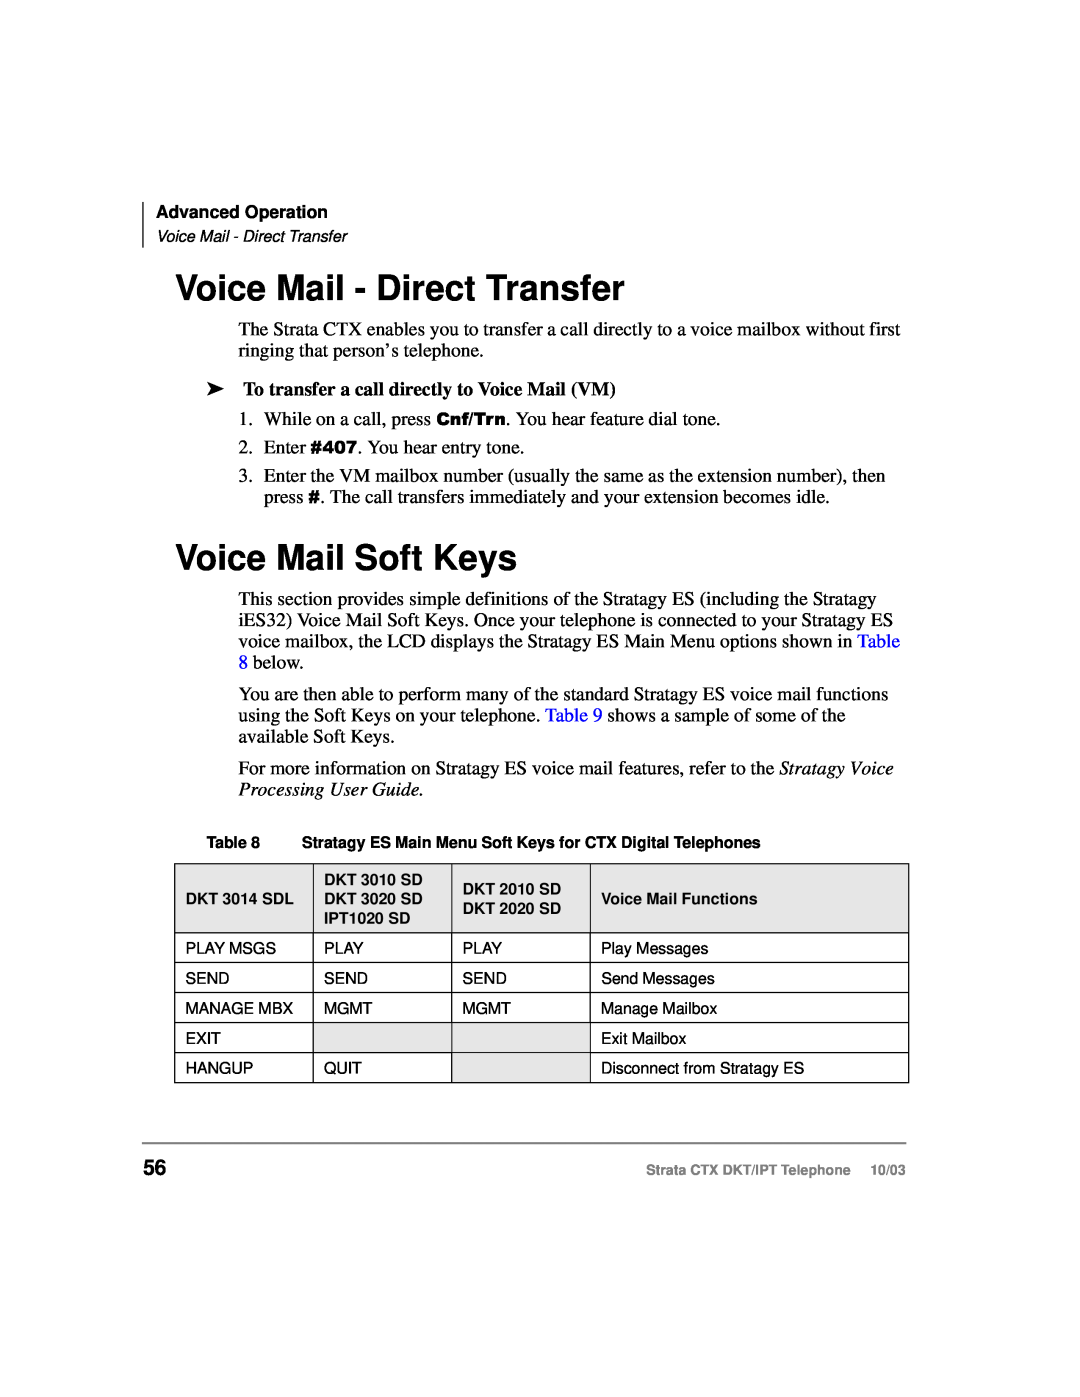 Toshiba IPT, DKT manual Voice Mail - Direct Transfer, Voice Mail Soft Keys, To transfer a call directly to Voice Mail VM 